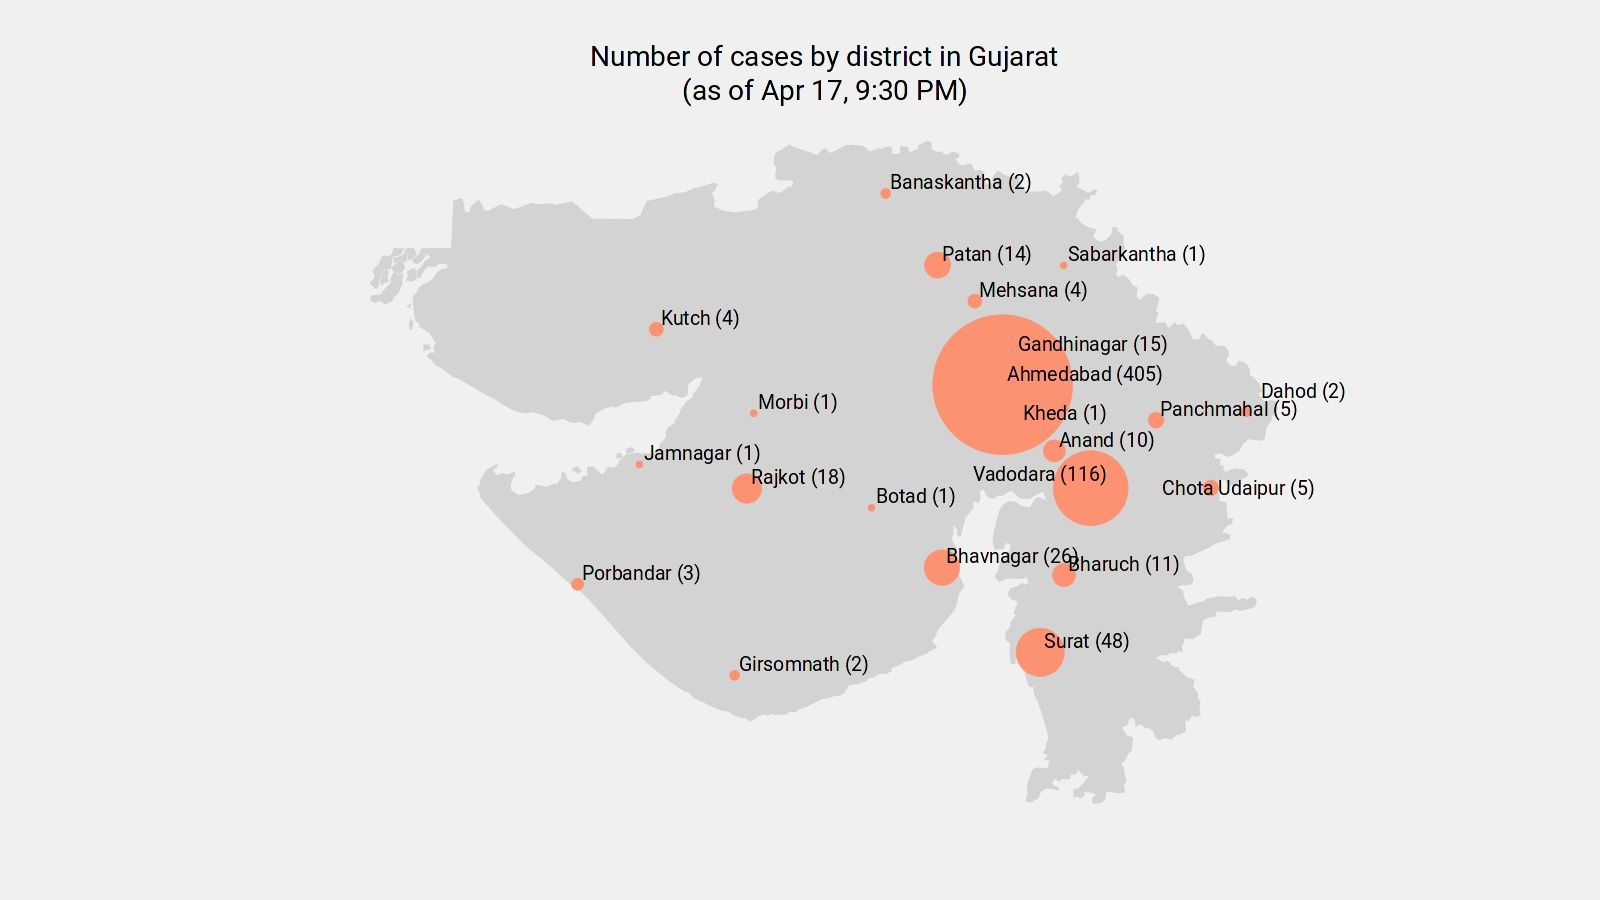 new coronavirus cases reported in Gujarat as of 5:00 PM